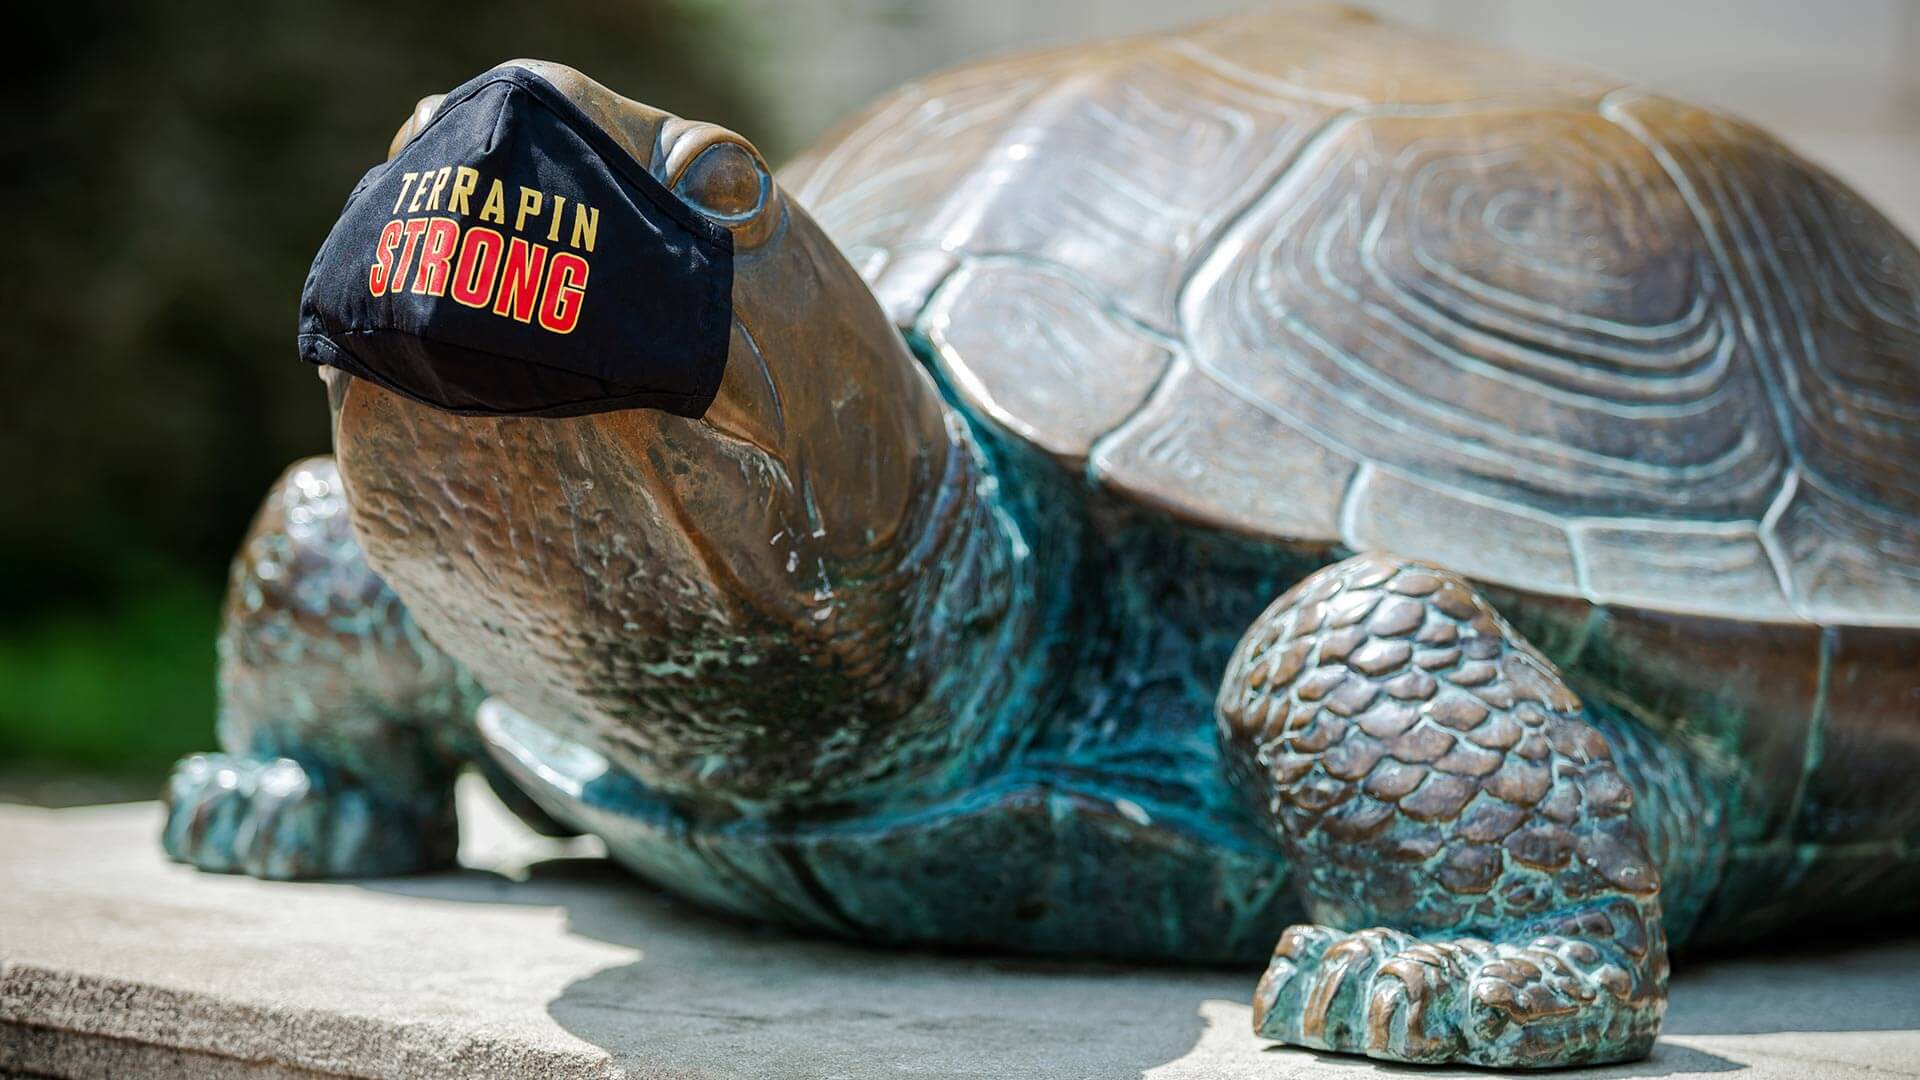 Testudo statue in Terrapin Strong mask